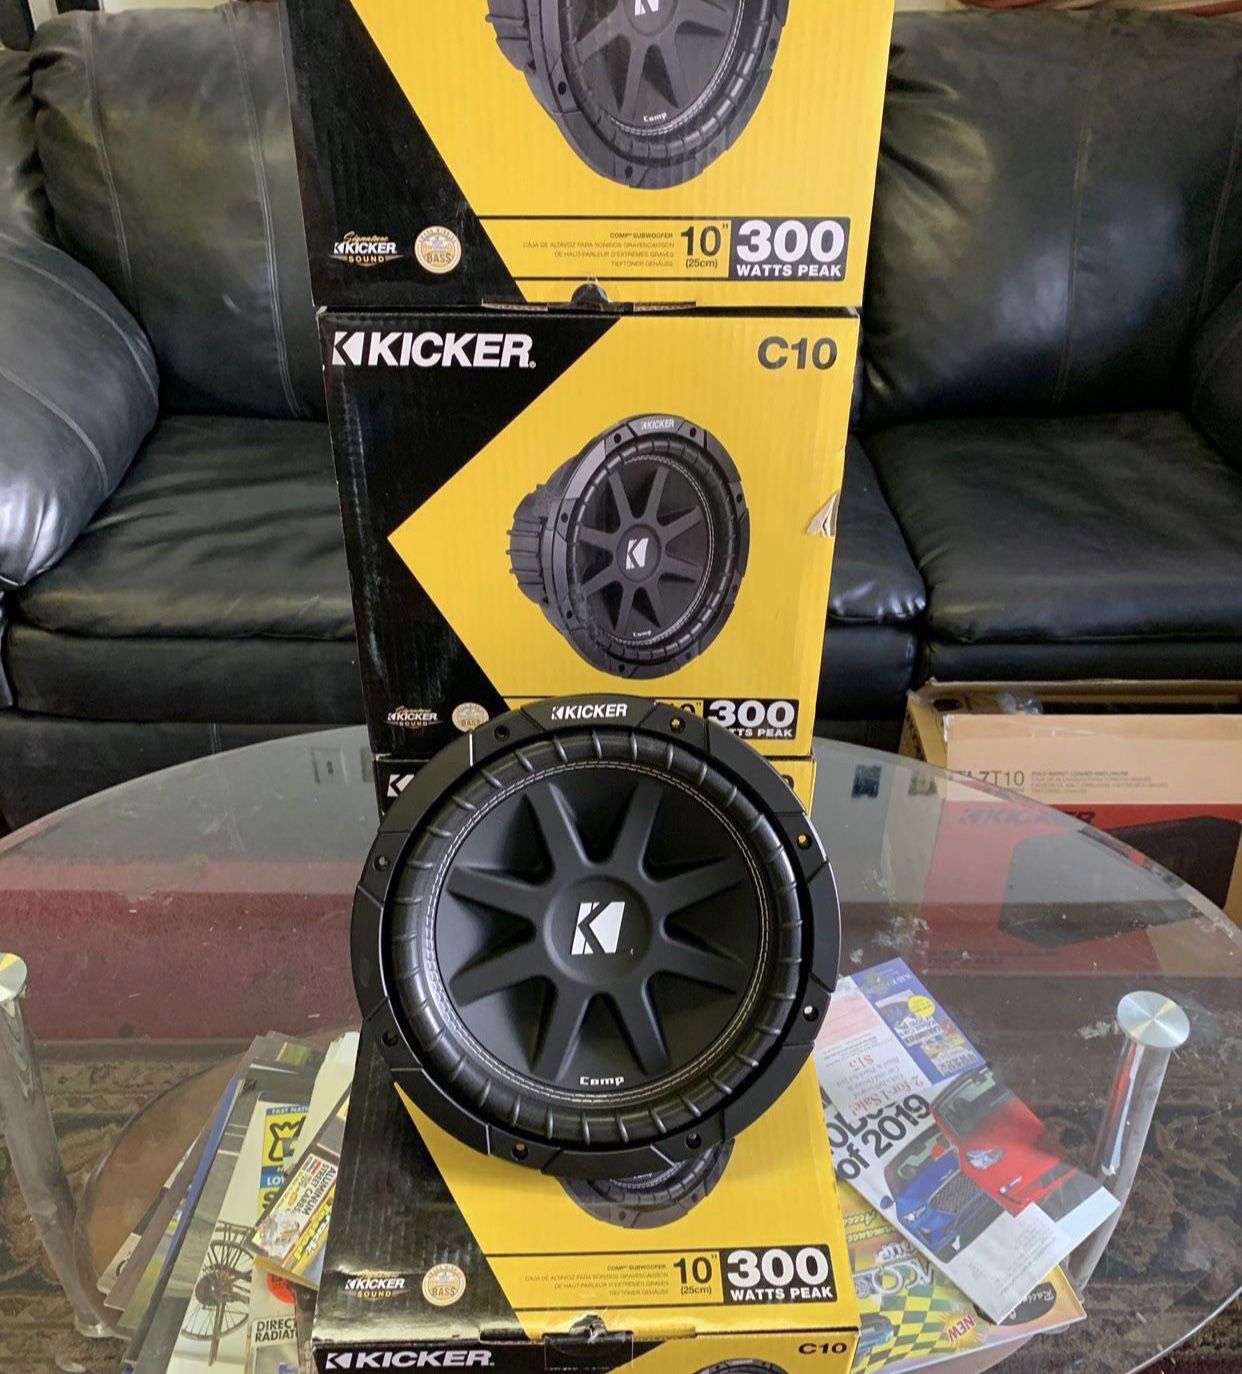 Kicker Car Audio . 10 Inch Car Stereo Subwoofer . Comp Series . Holiday Super Sale ! $65 Each While They Last . New